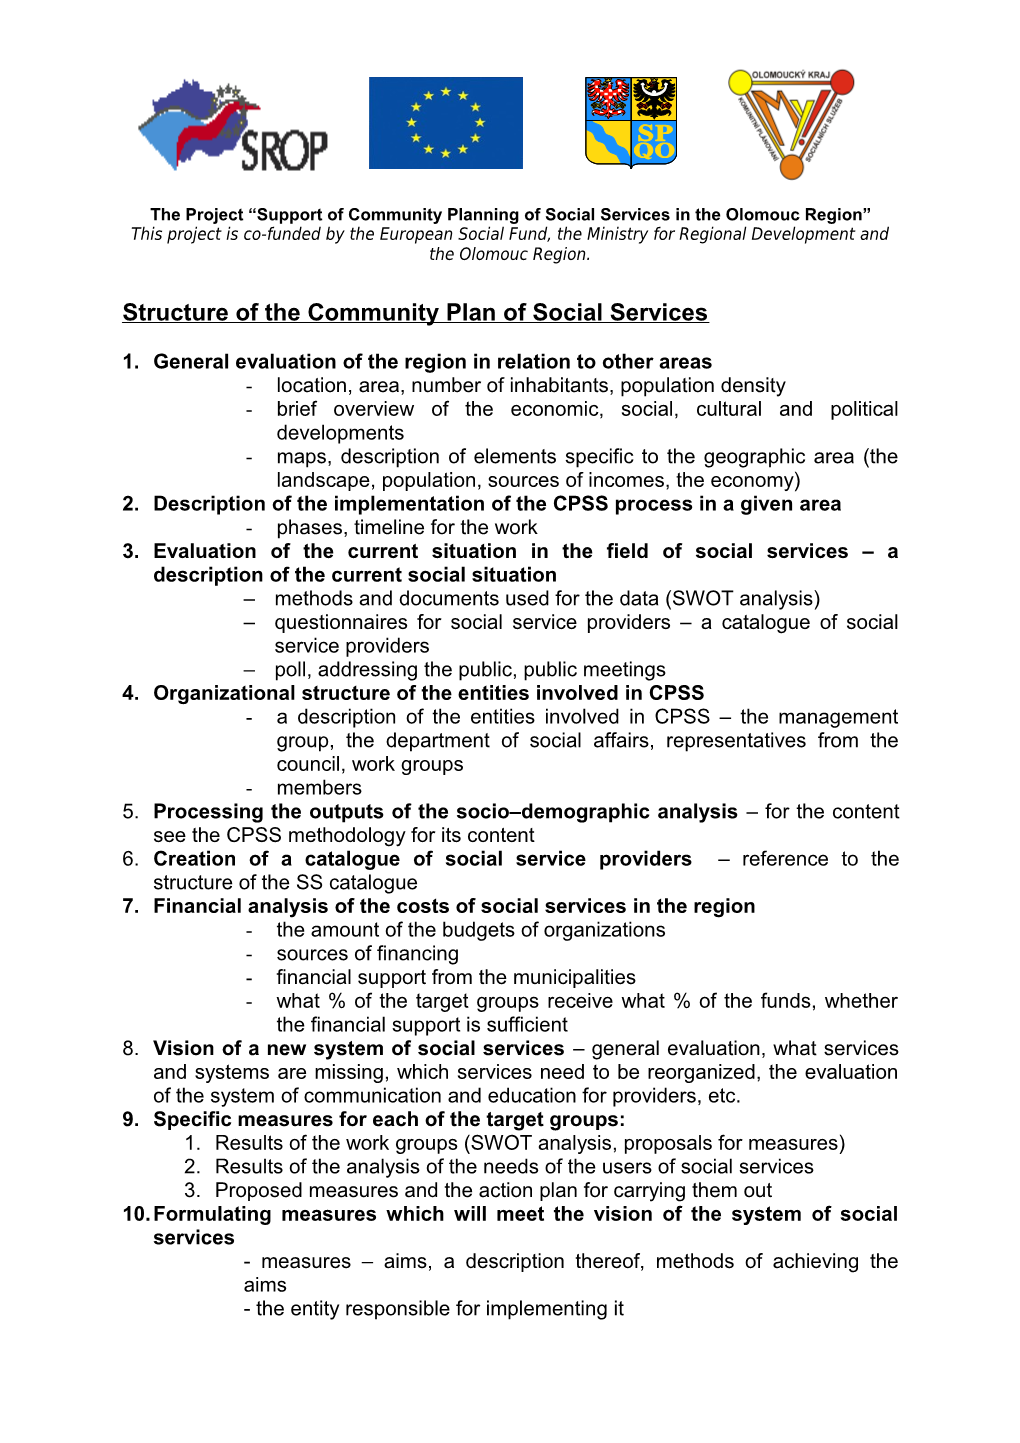 Structure of the Community Plan of Social Services